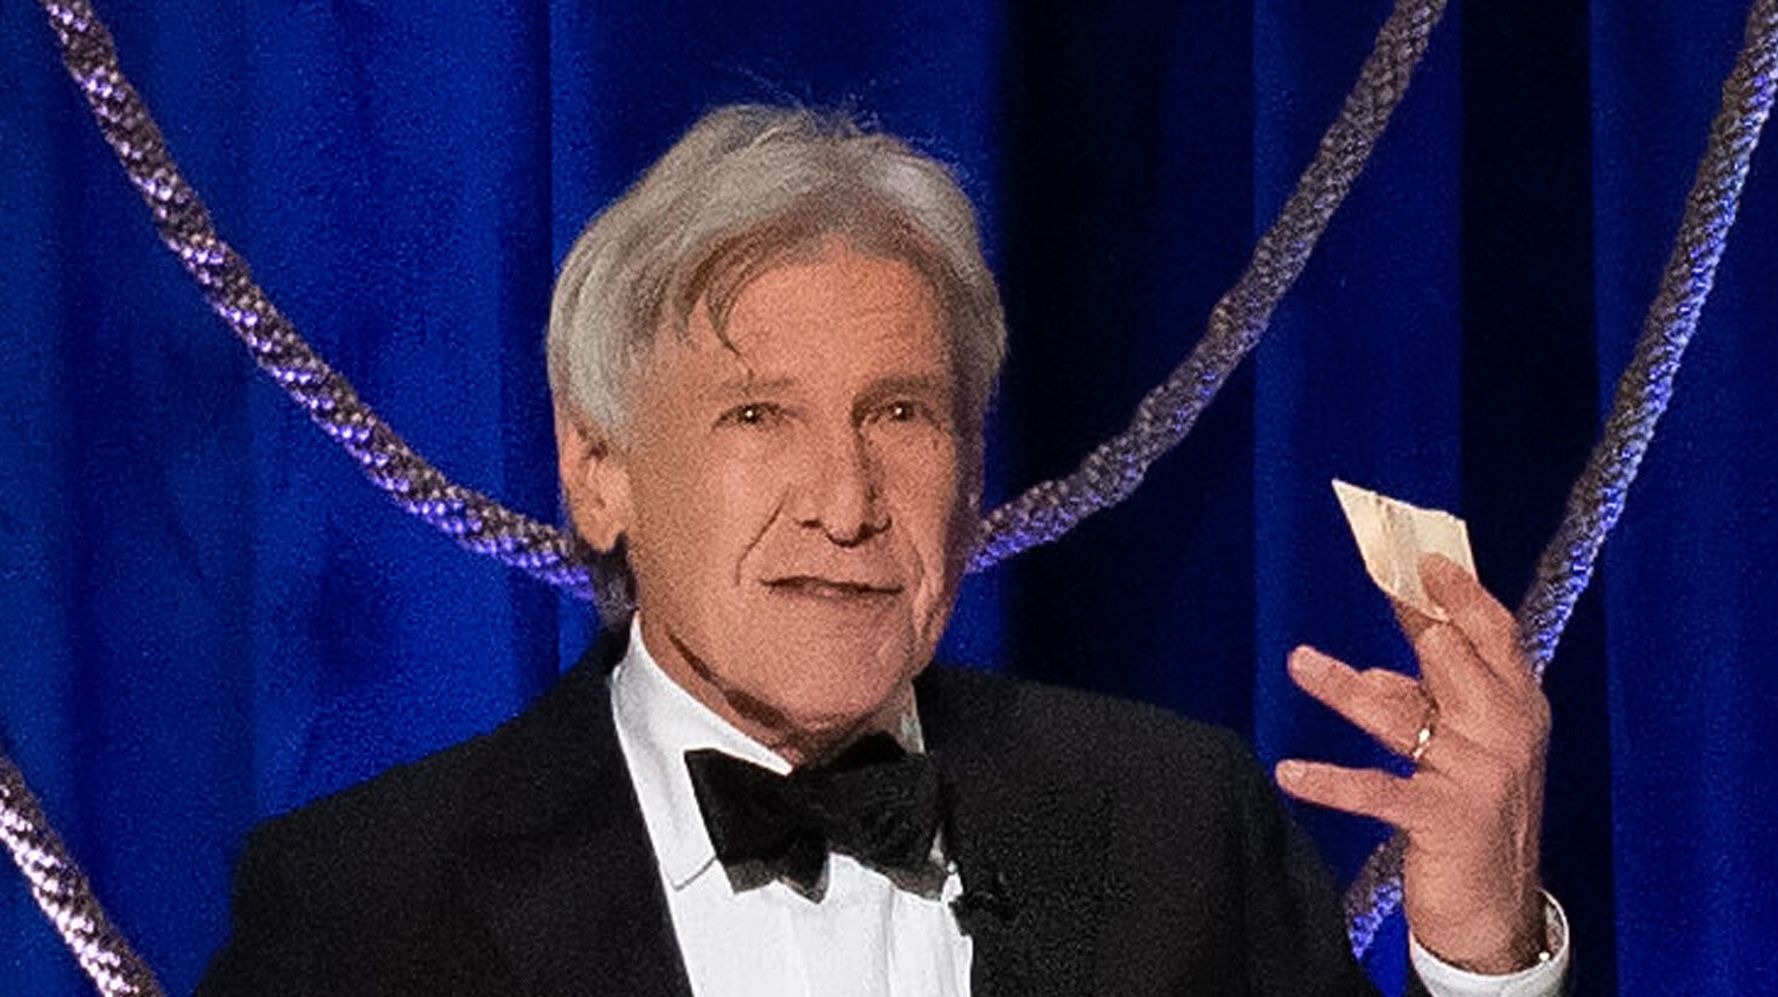 Harrison Ford Wins The Oscar For Strangest Academy Awards Intro Of The Night